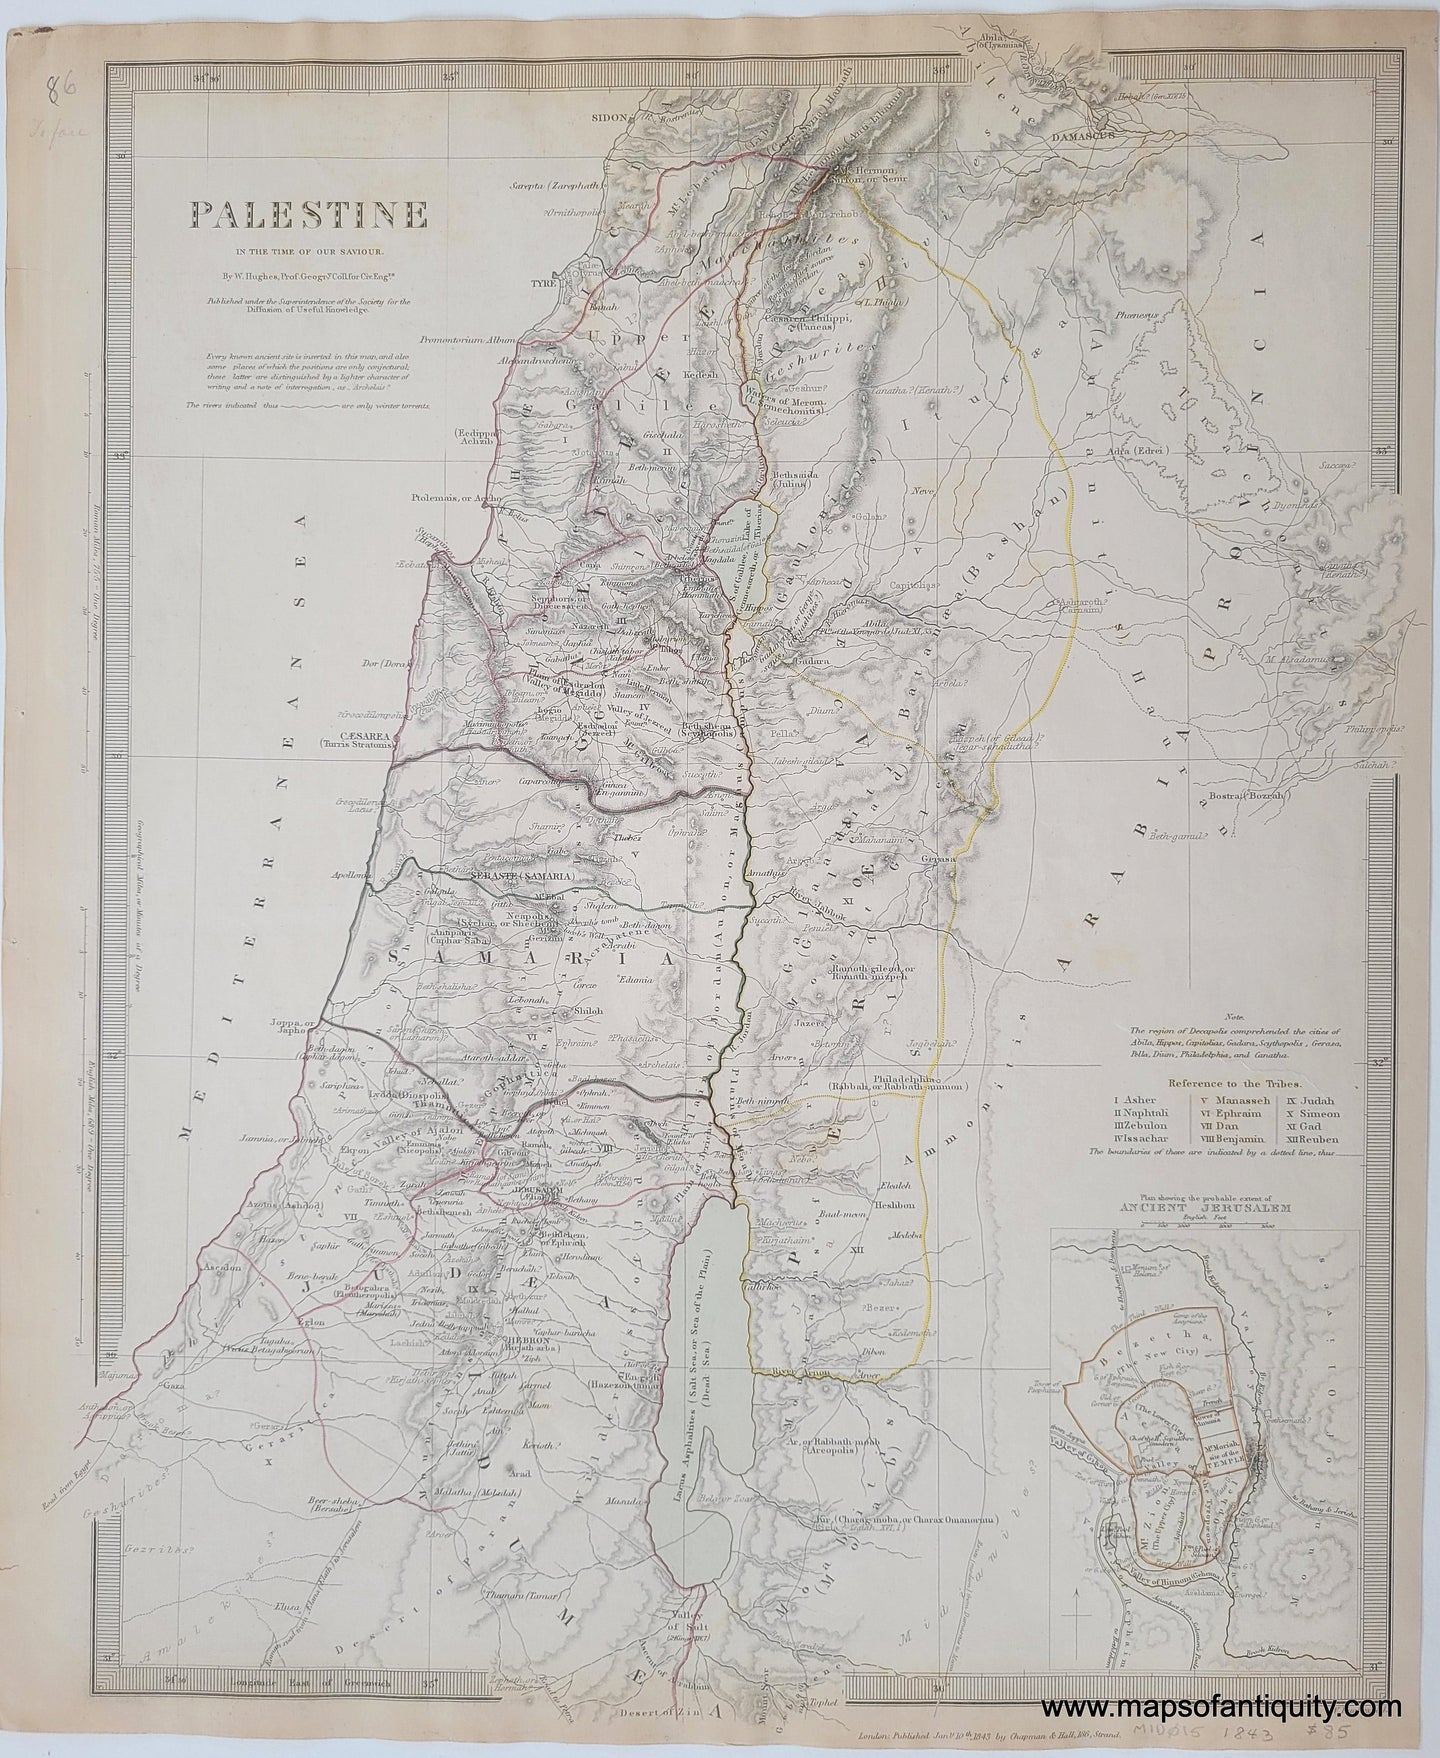 Antique-Hand-Colored-Map-Palestine-in-the-Time-of-Our-Saviour.-******-Middle-East-and-Holy-Land--1842-SDUK/Society-for-the-Diffusion-of-Useful-Knowledge-Maps-Of-Antiquity